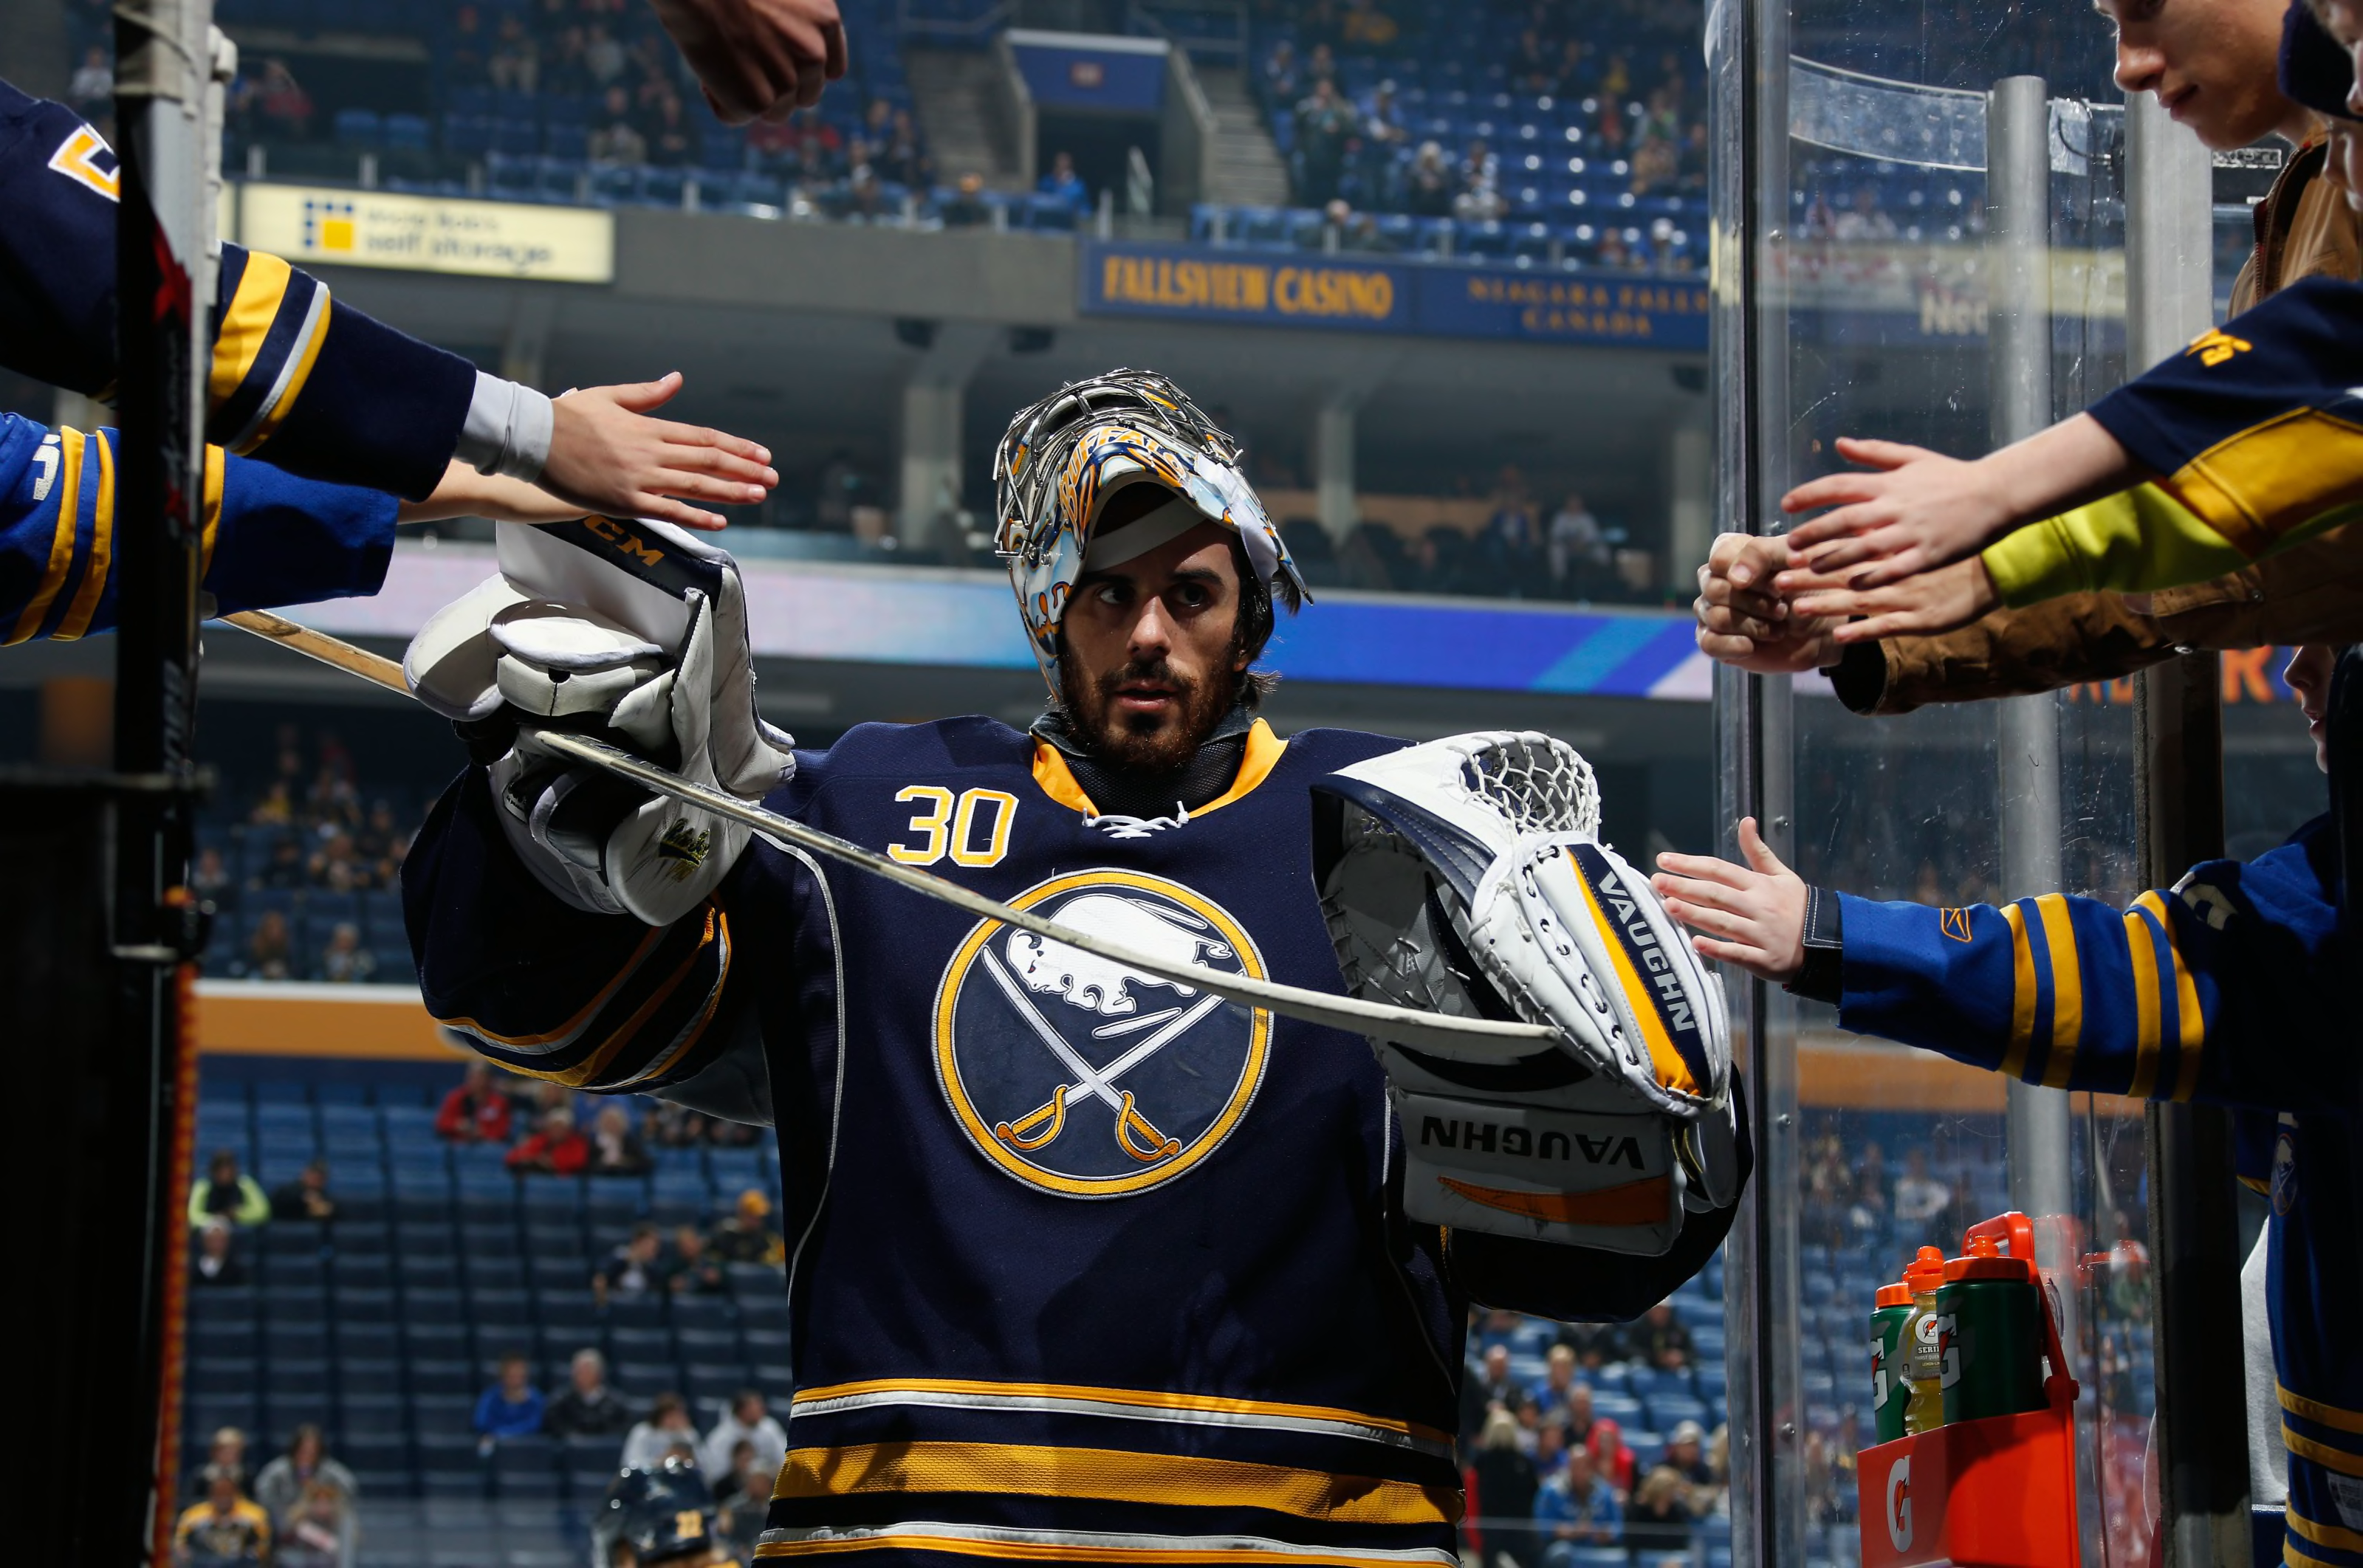 Ryan Miller Wore a Crazy Number of Jerseys For The Buffalo Sabres